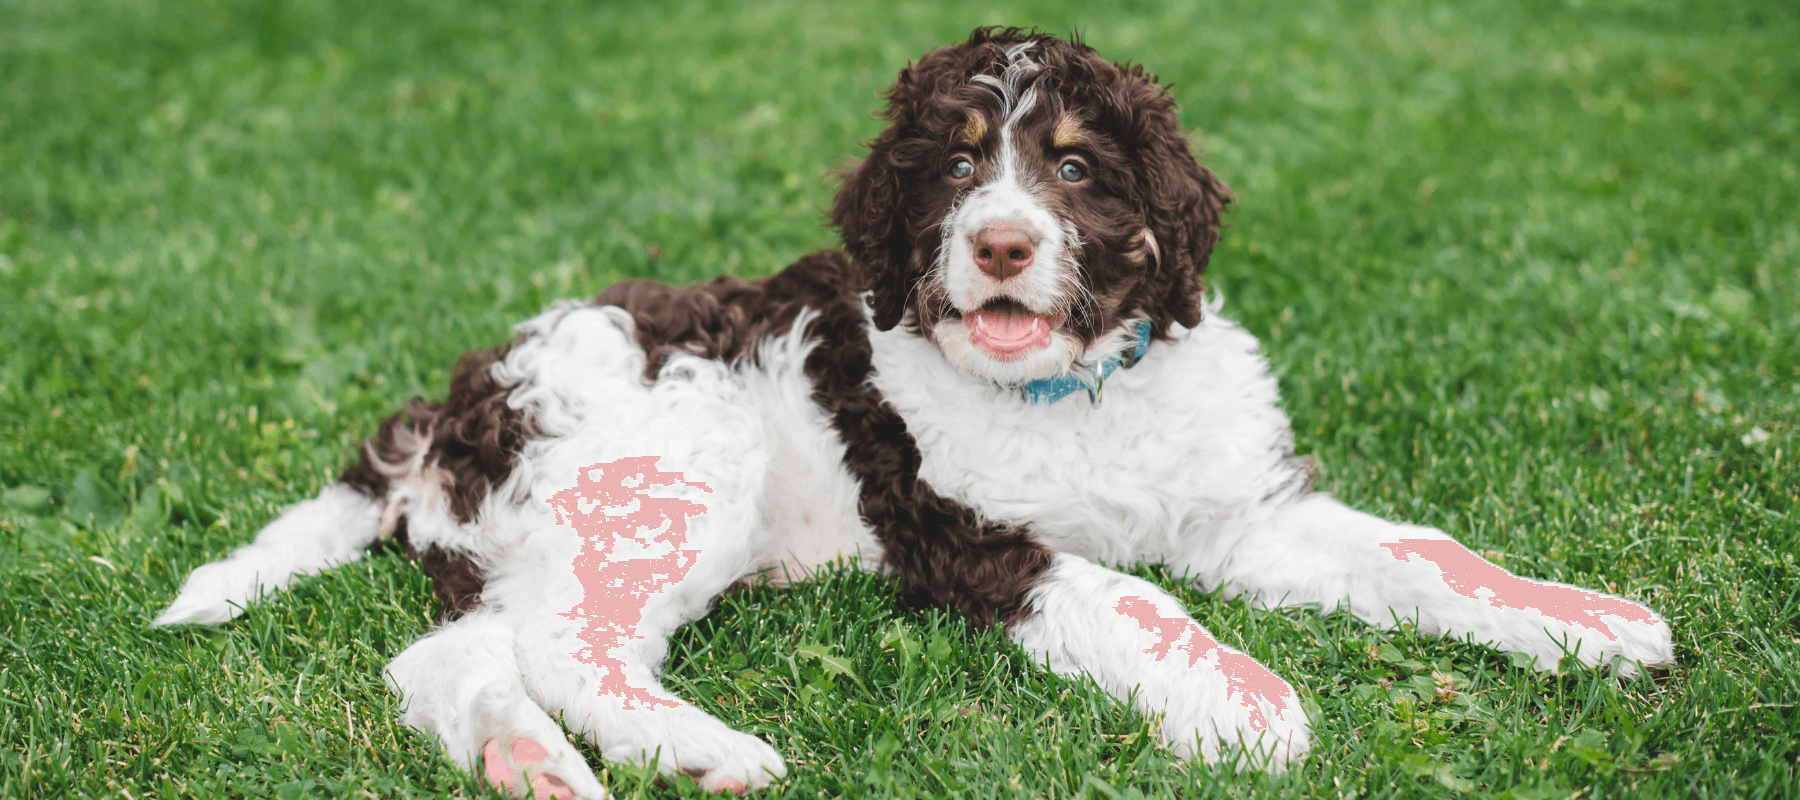 9 Outdoor Activities to Relieve Your Bernedoodle's Stress and Anxiety - Calming Dog